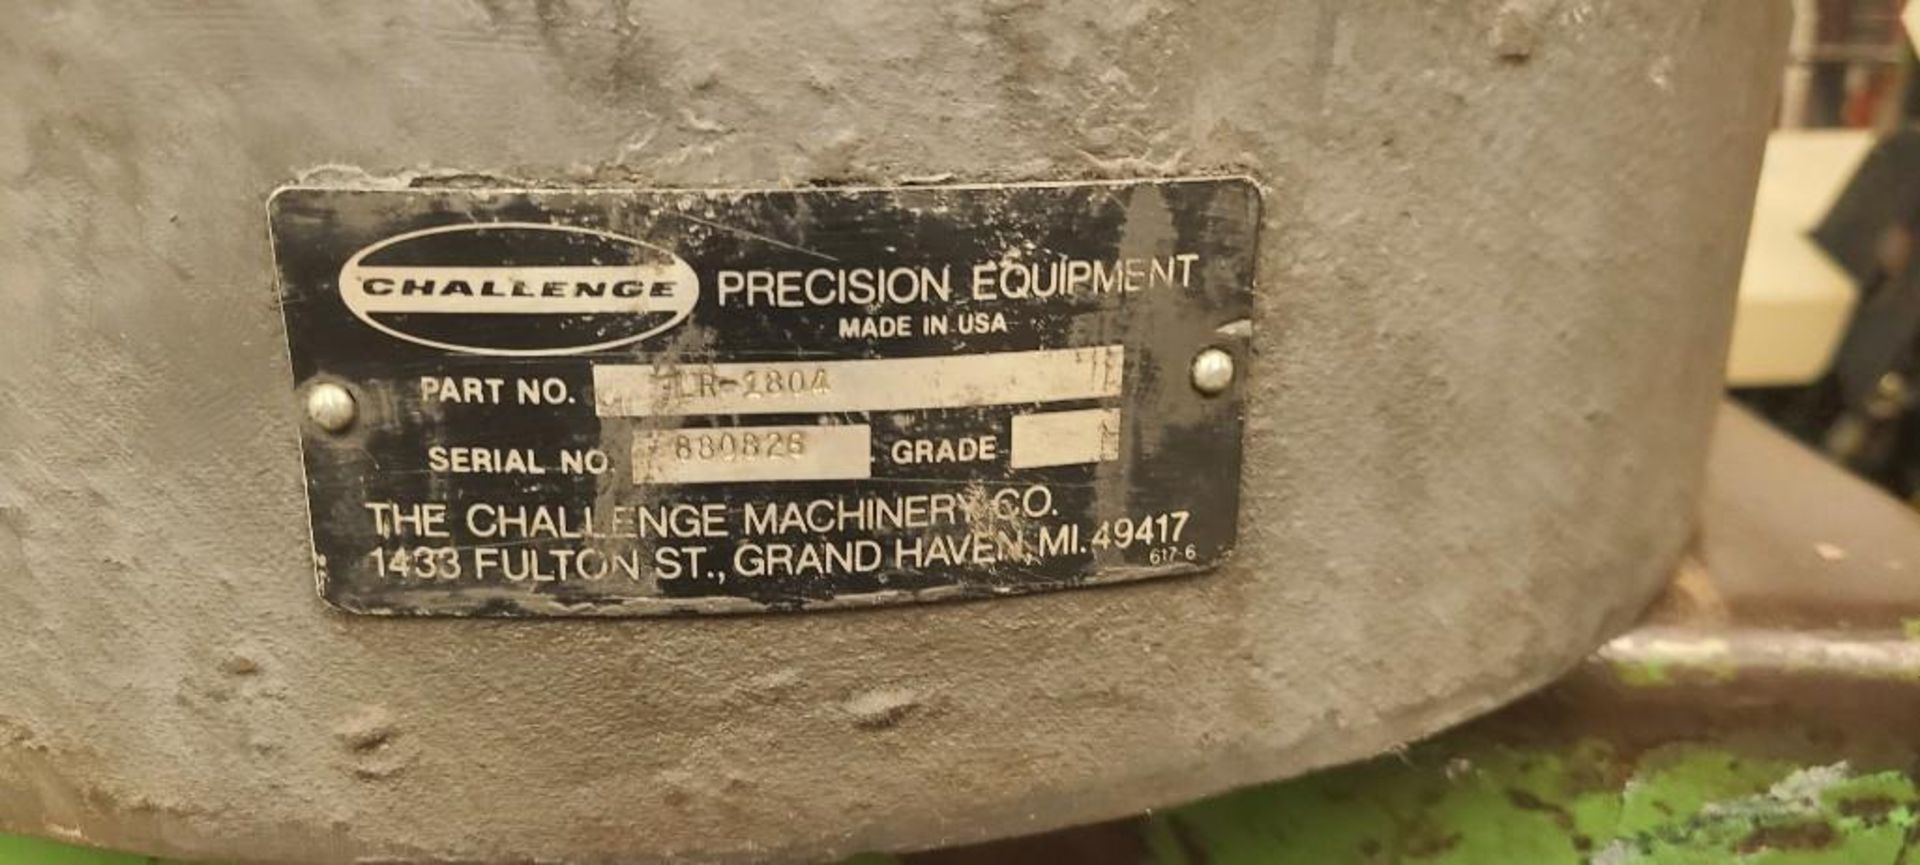 CHALLENGE PRECISION STEEL SERVICE PLATE - Image 3 of 3